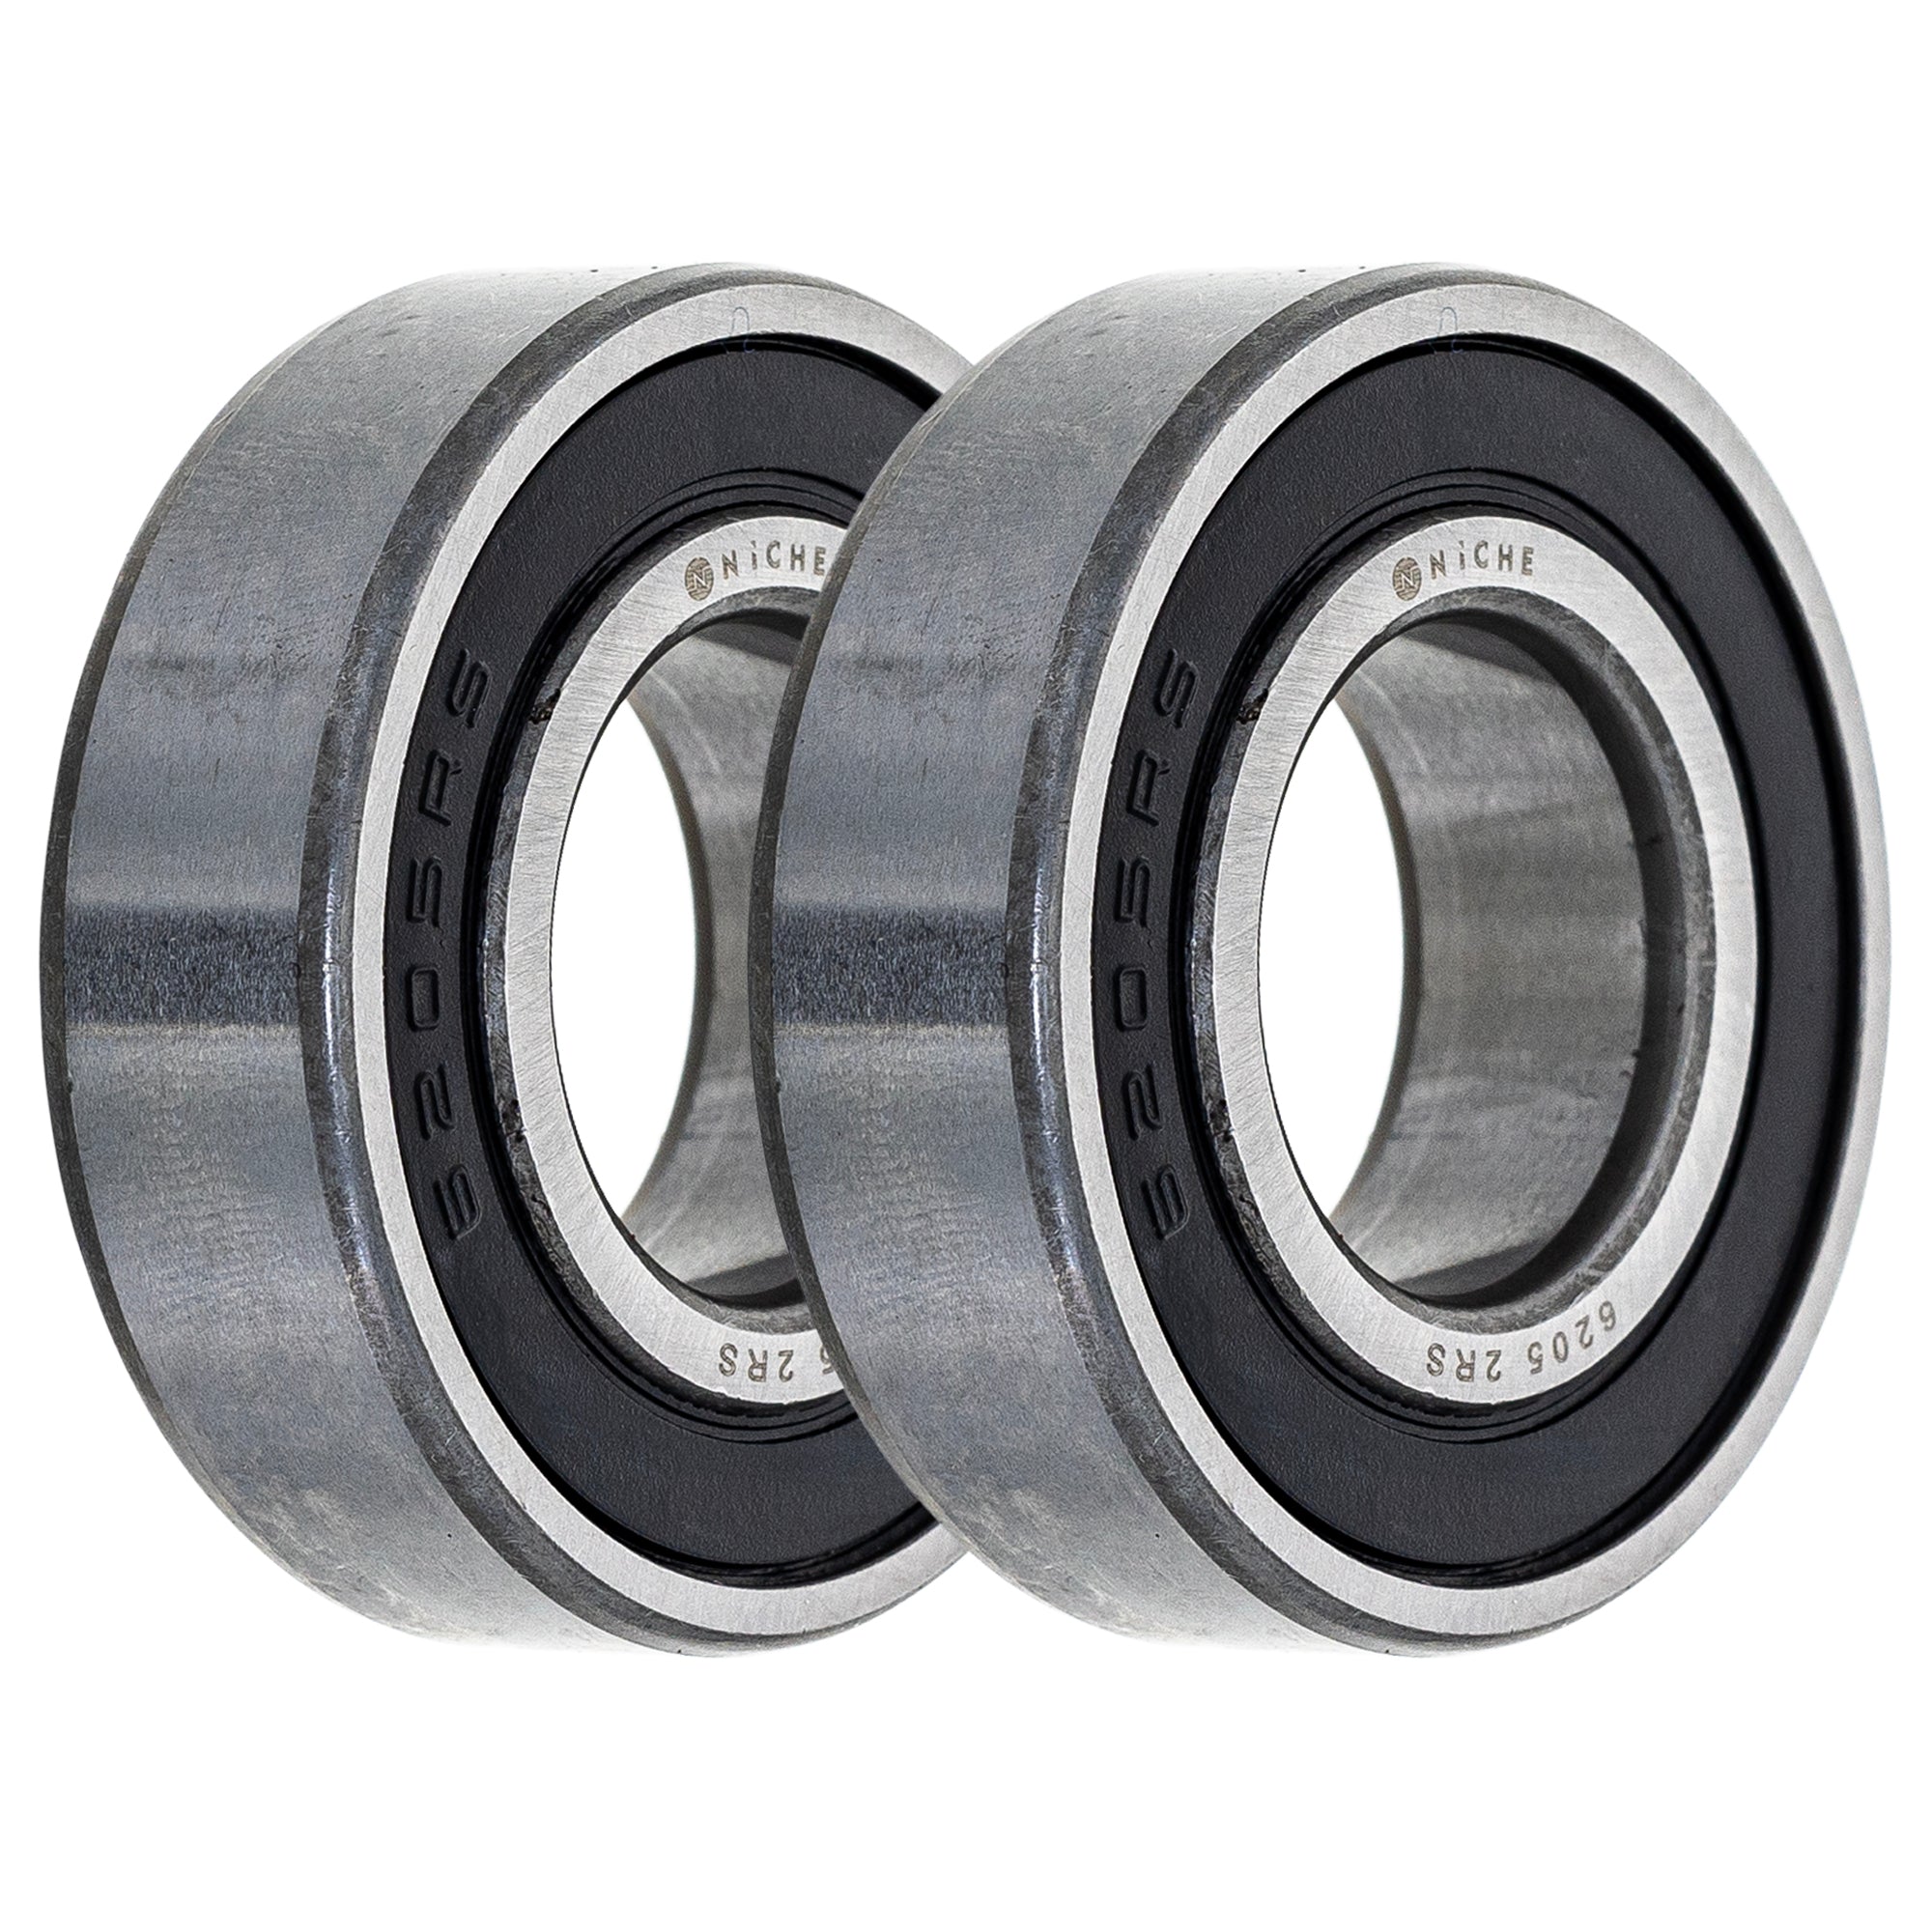 Single Row, Deep Groove, Ball Bearing Pack of 2 2-Pack for zOTHER Toro Exmark Snapper NICHE 519-CBB2228R